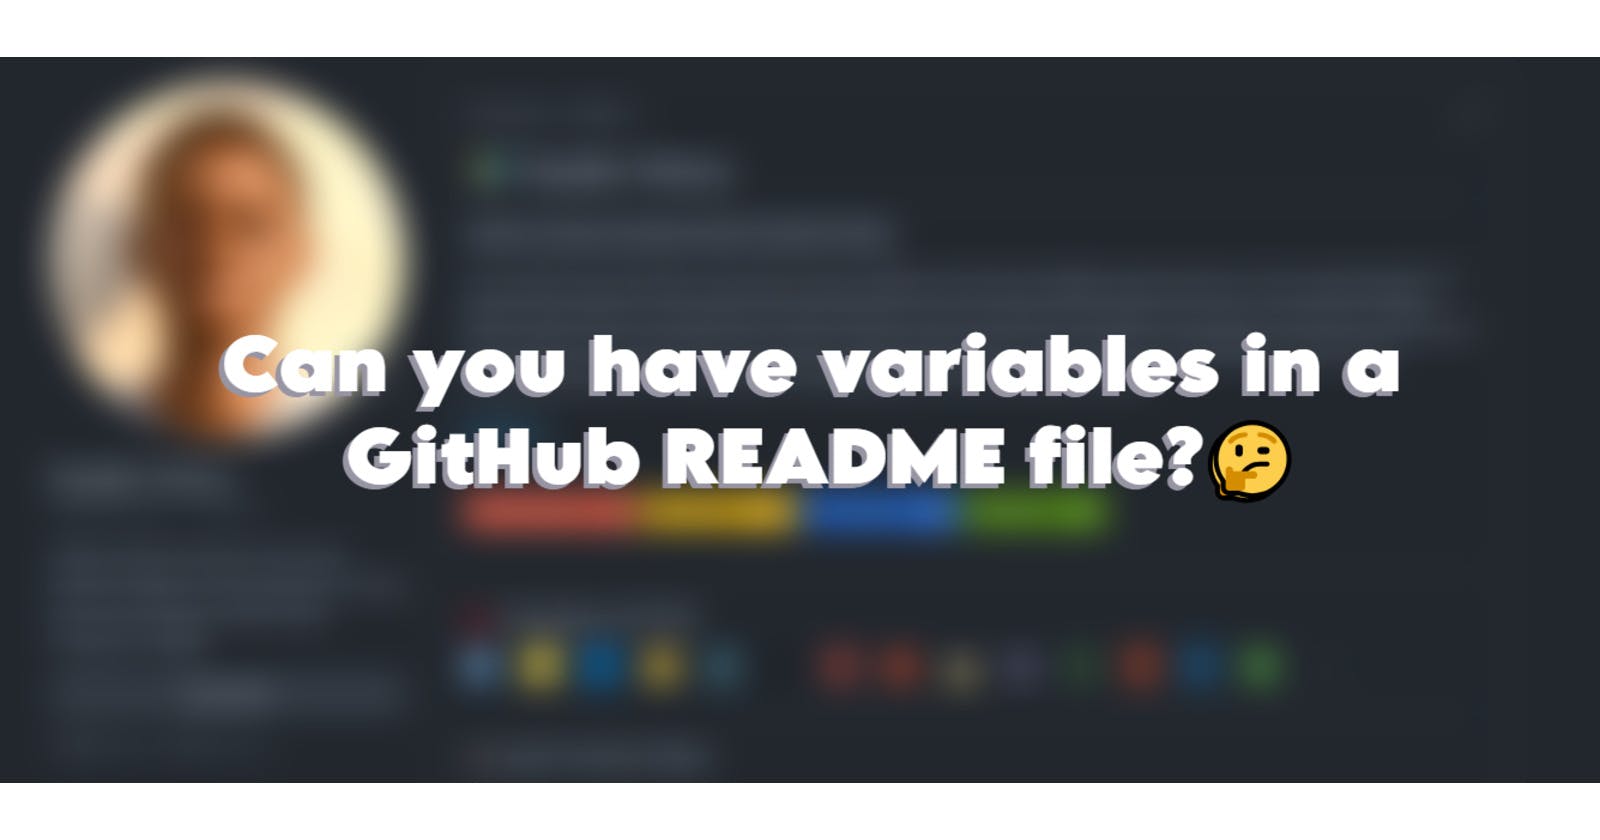 Can you have variables in a GitHub README file?🤔